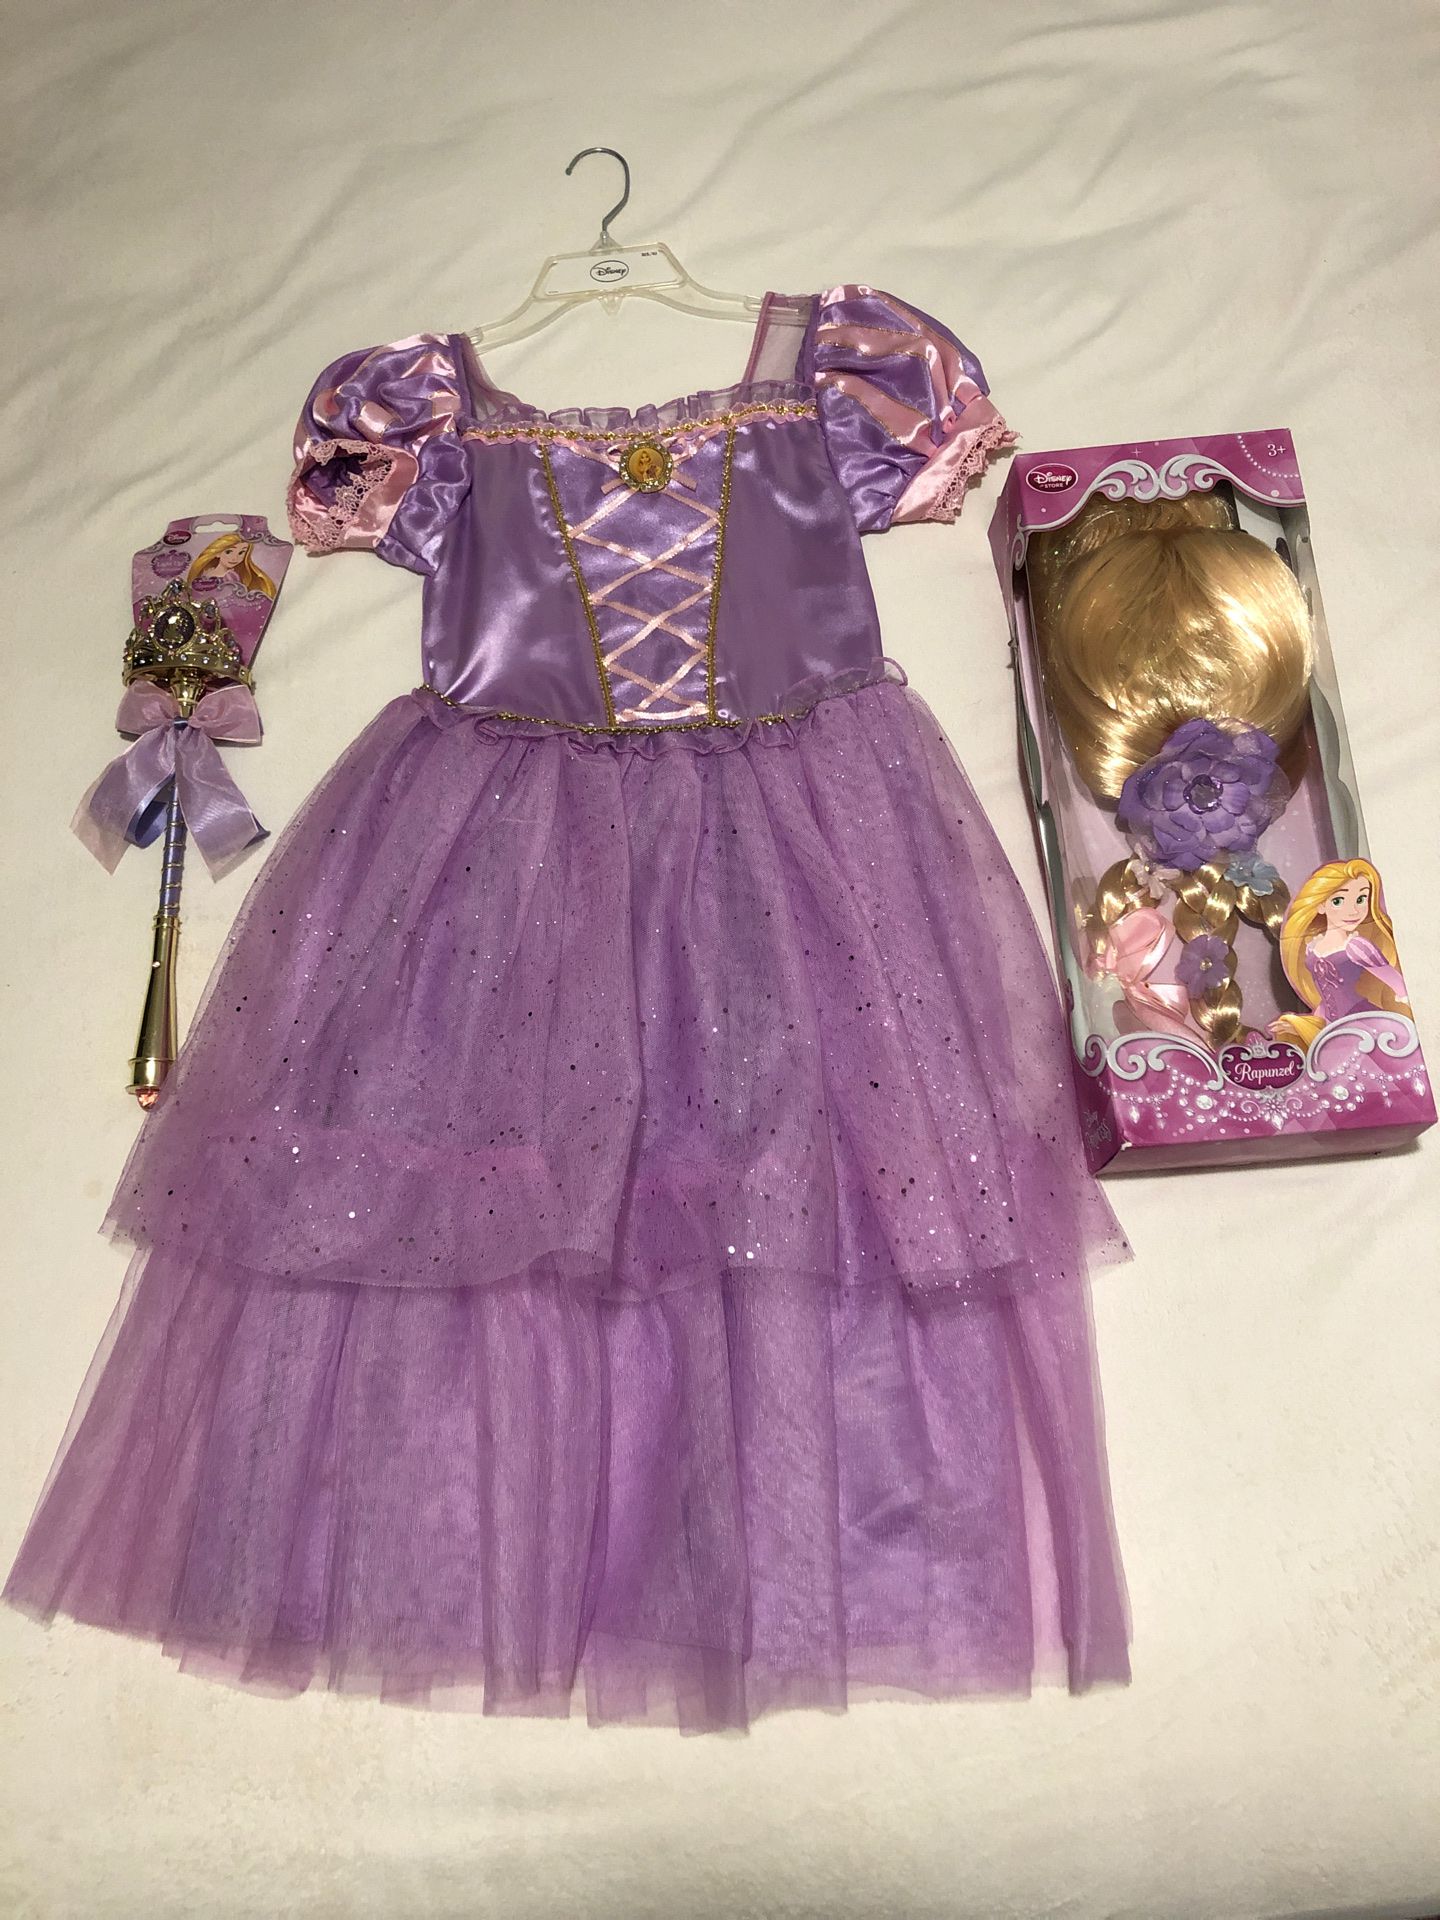 Rapunzel Halloween costume with wig and wand.